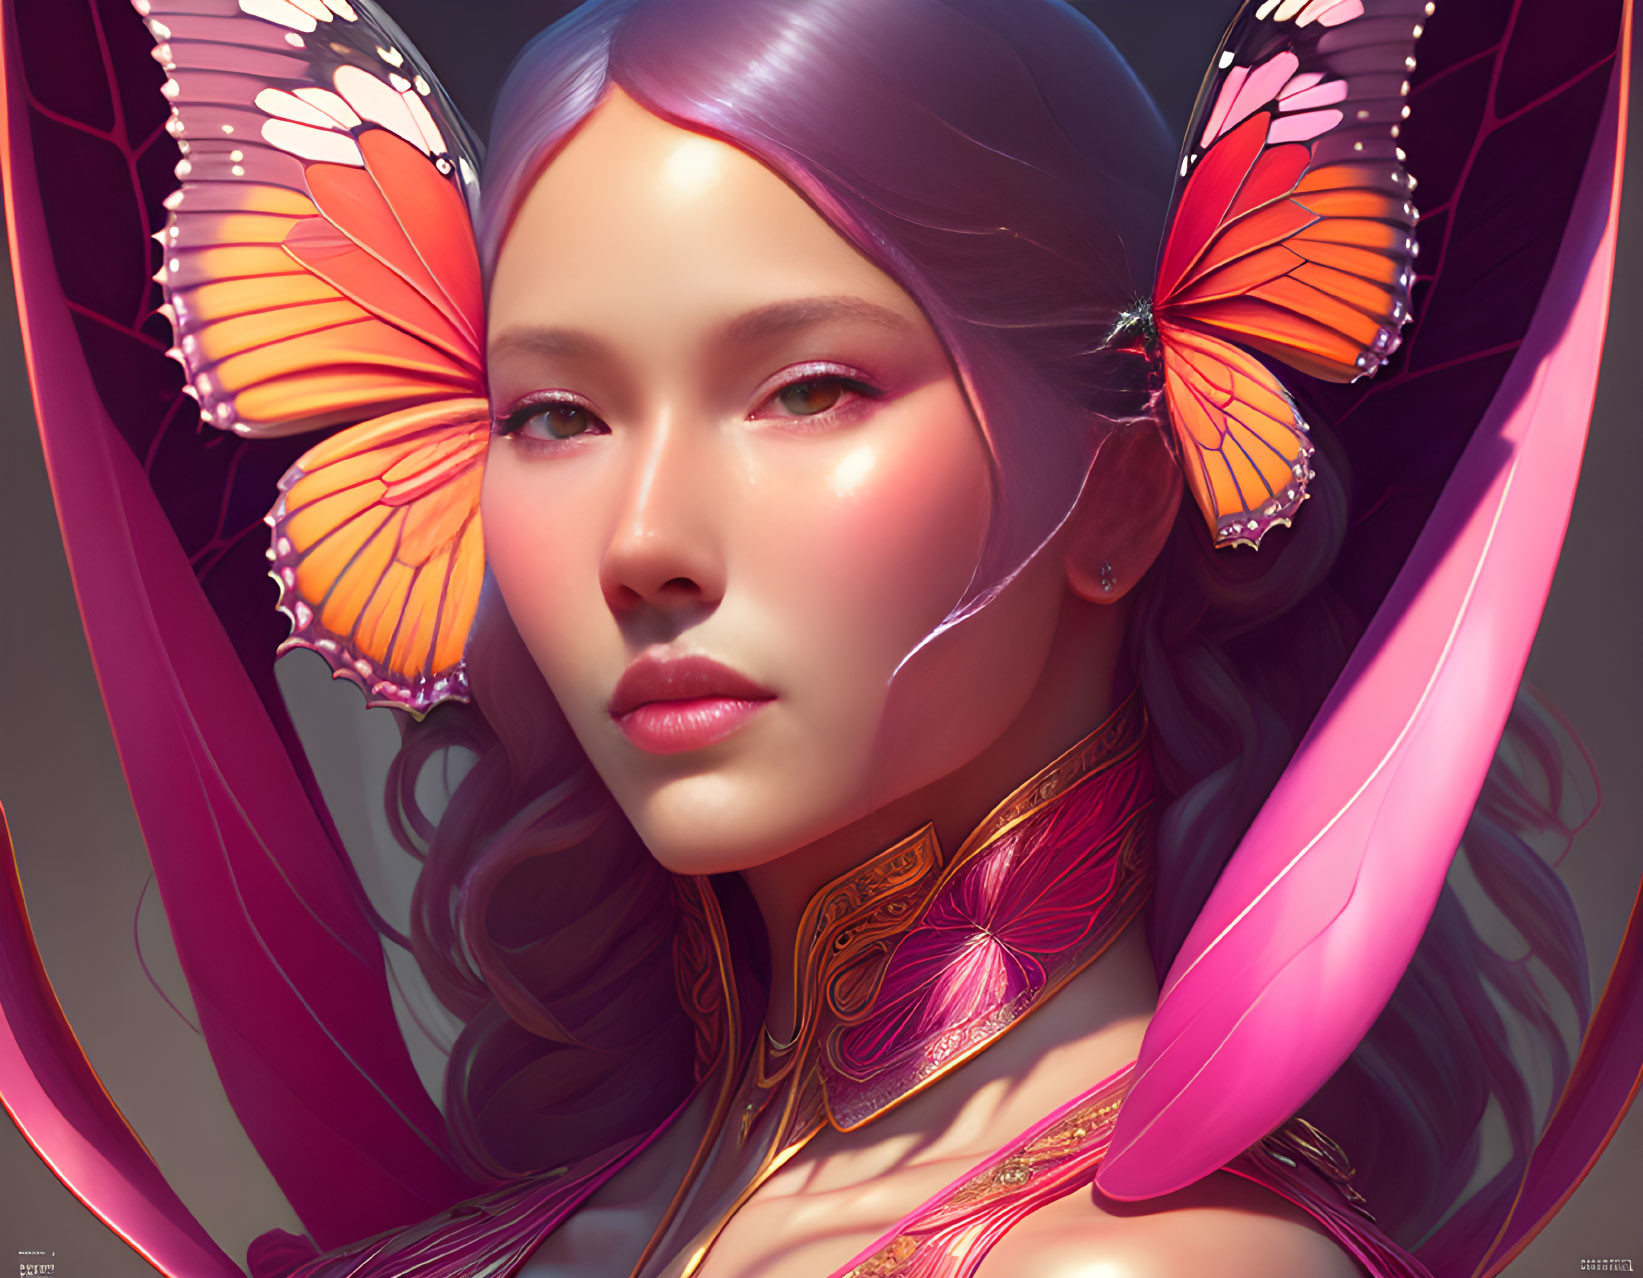 Digital portrait of woman with purple hair, butterfly wings, and golden neck armor